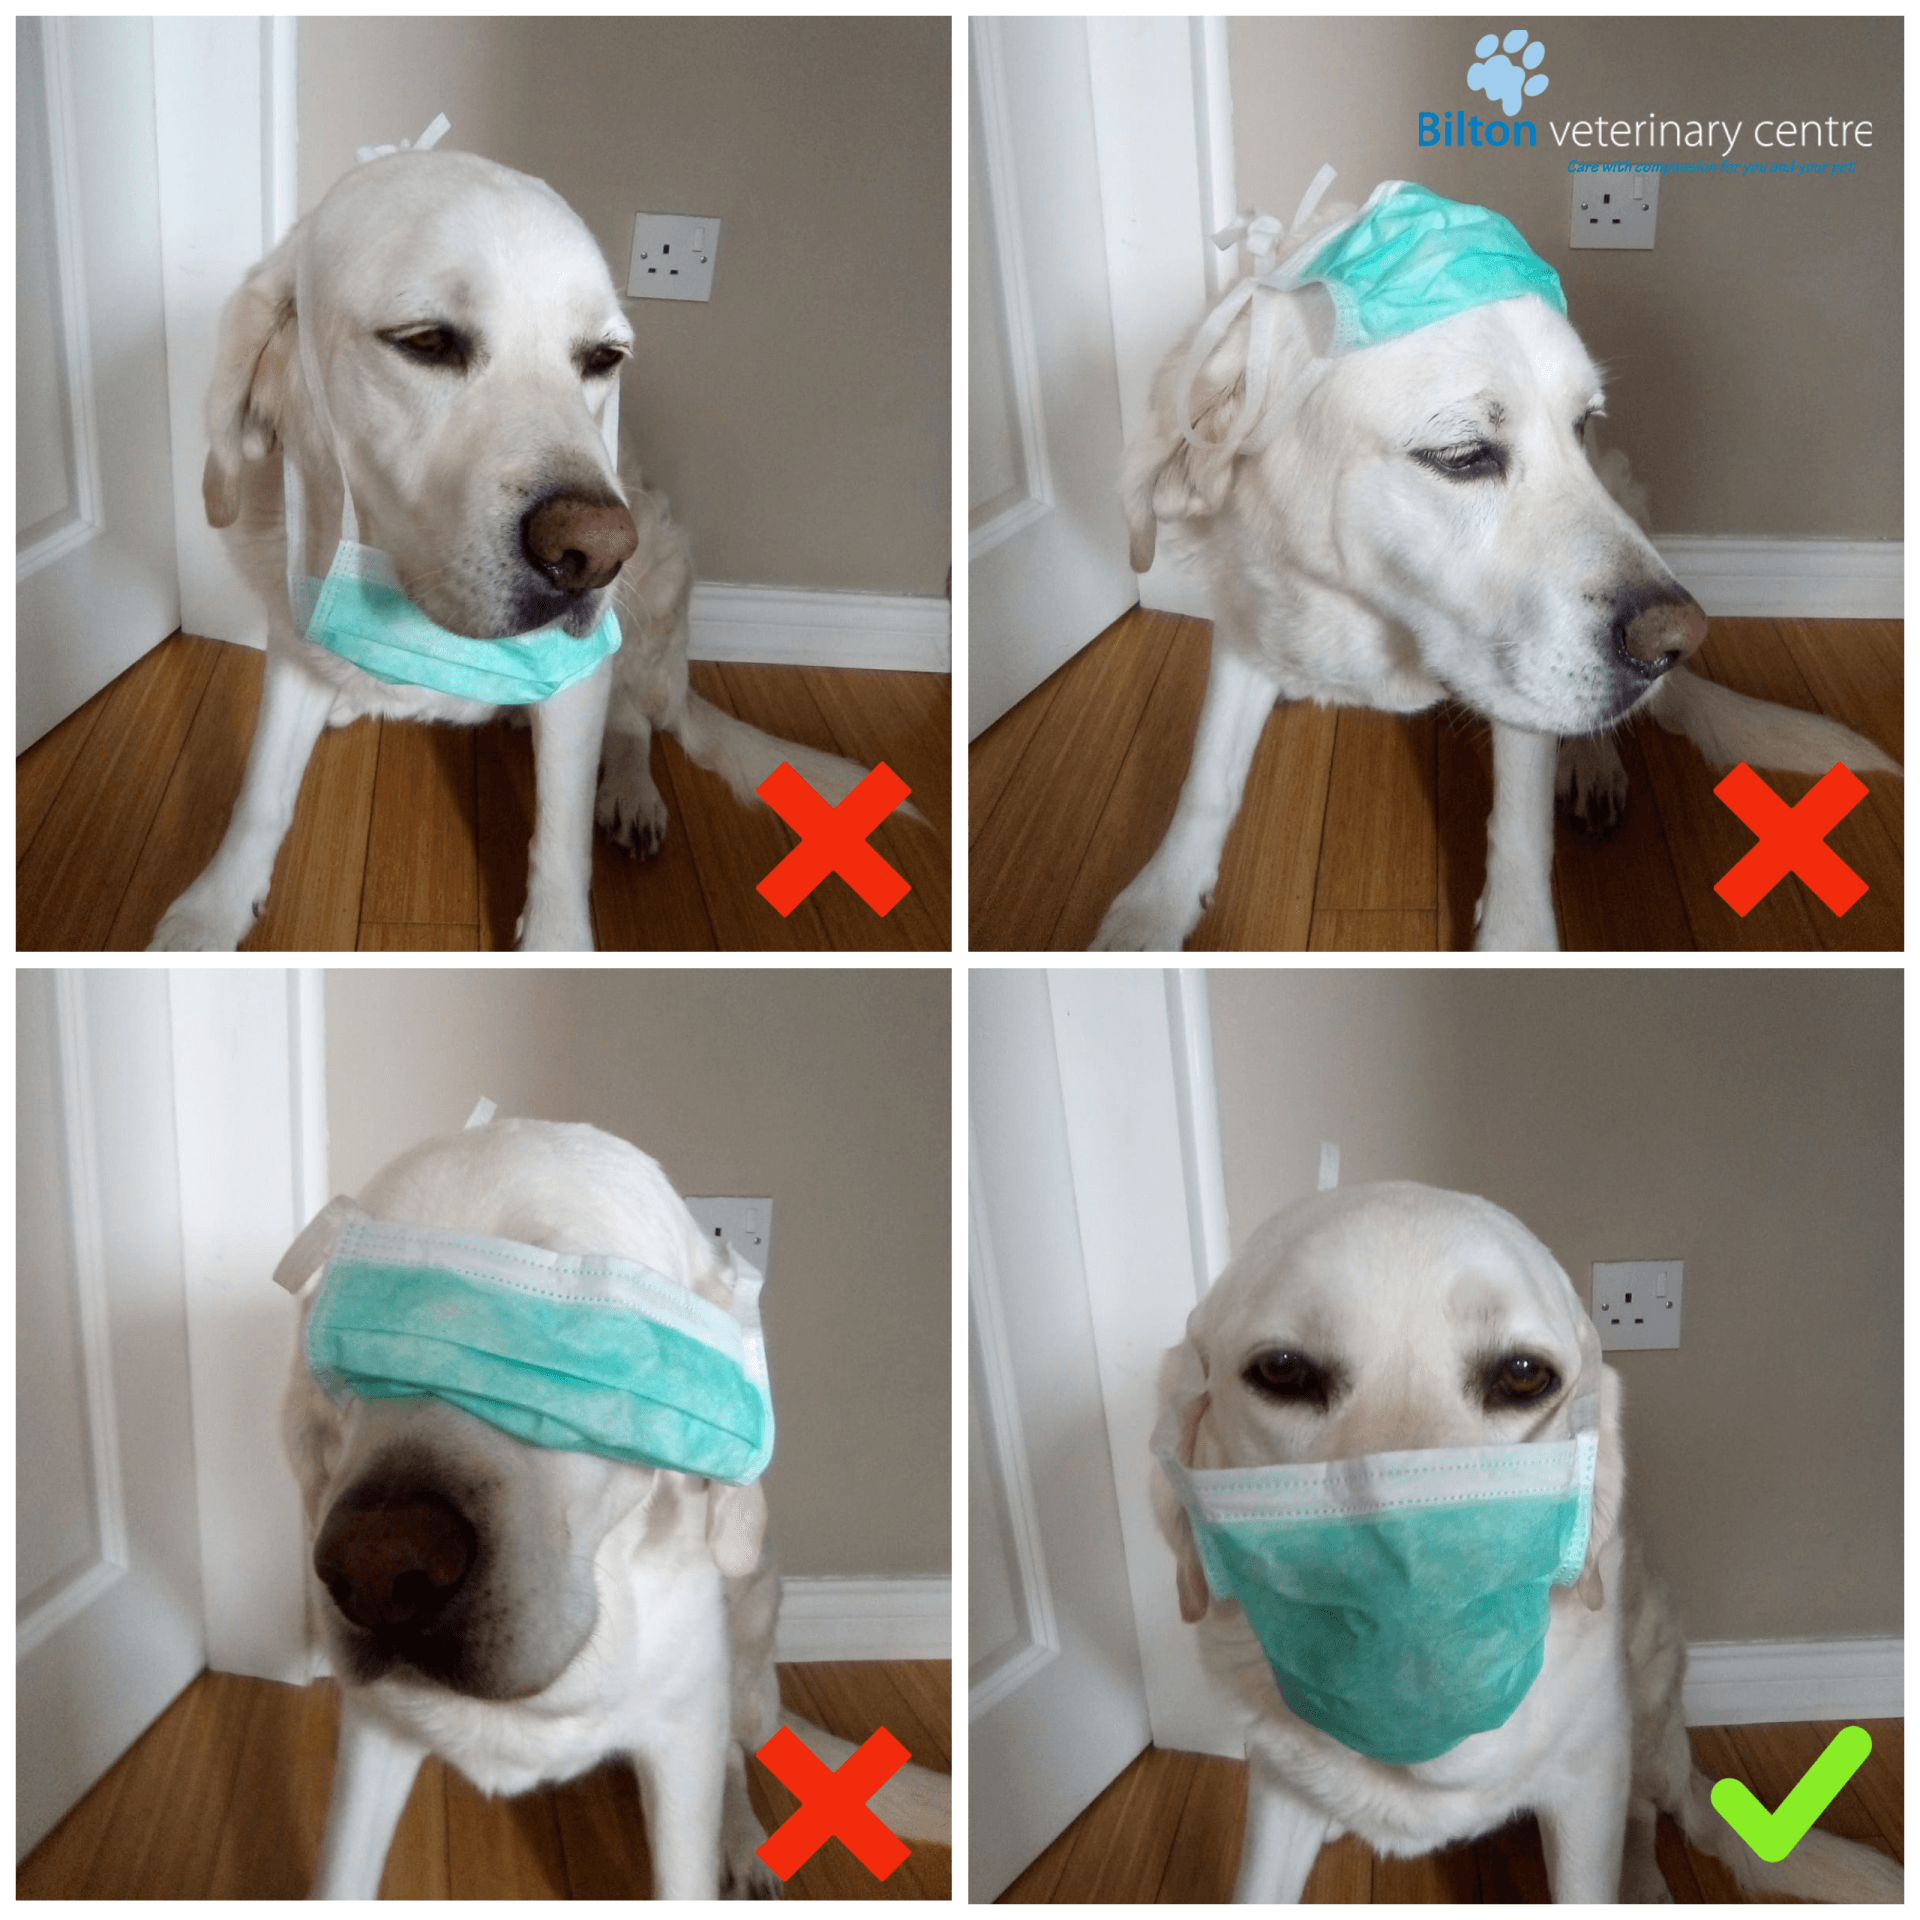 Dog wearing surgical mask in silly ways and one correct way